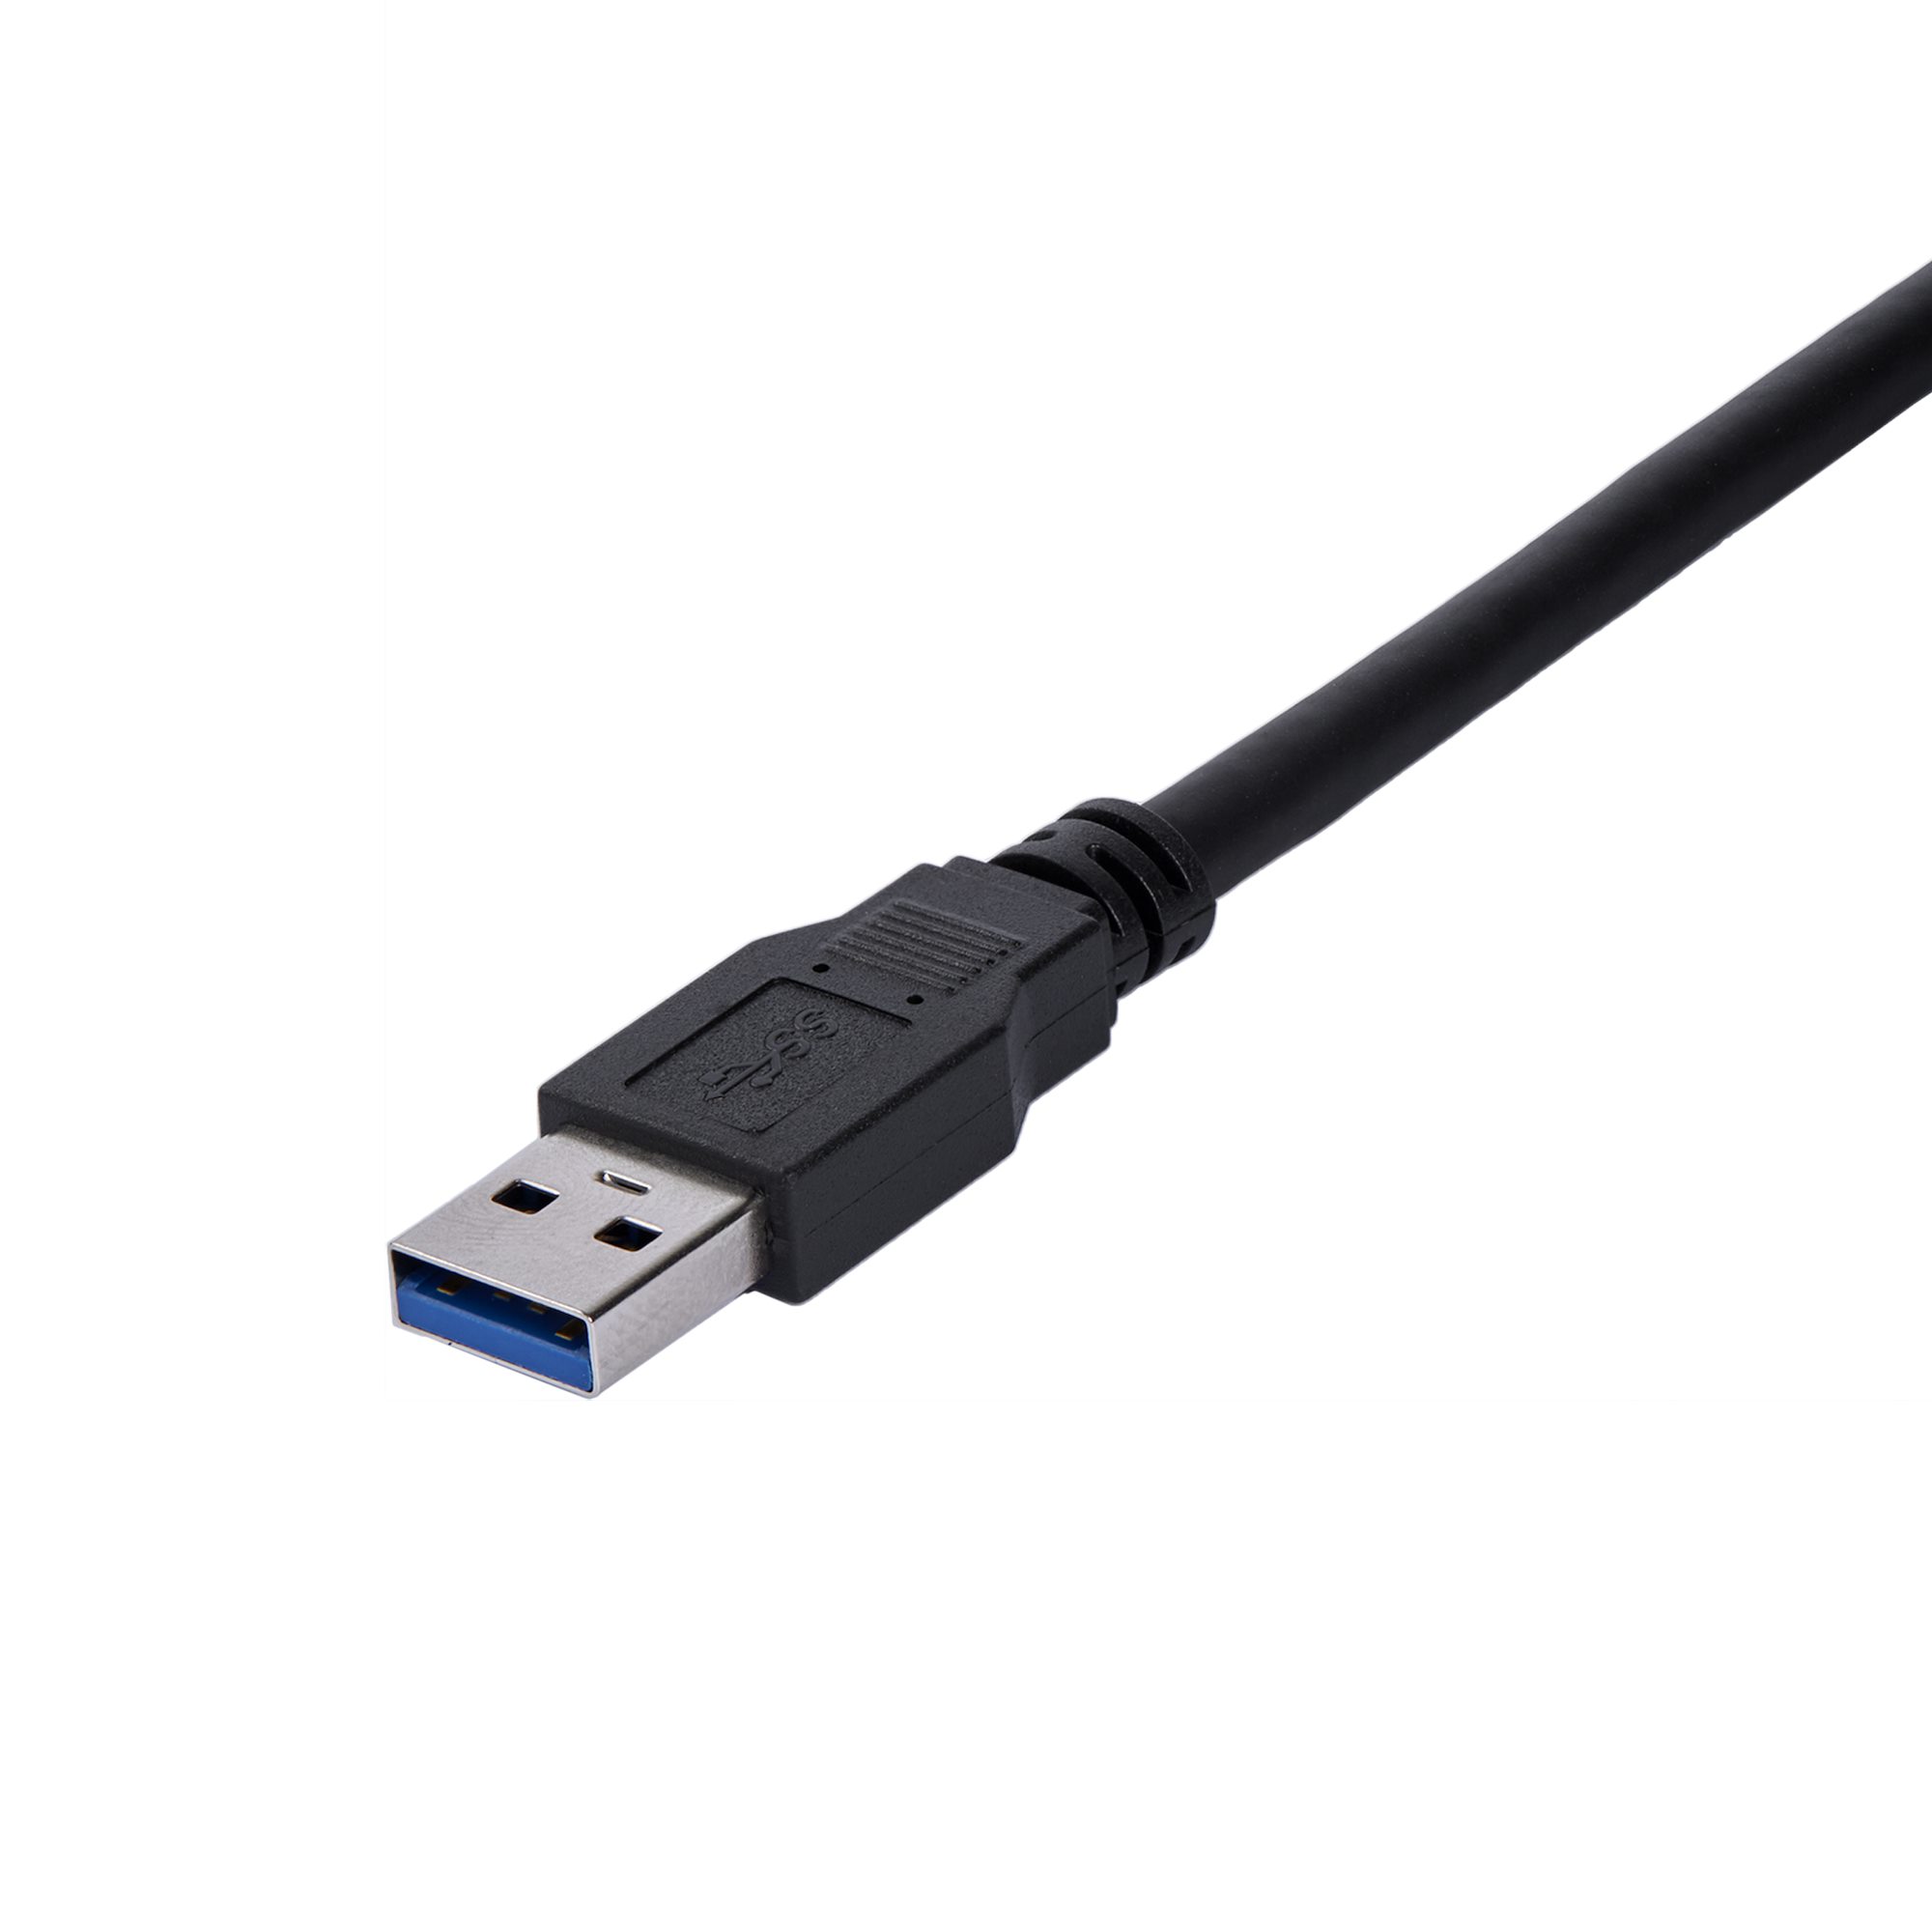 Right Angle A to B Right Angle USB 3.0 A to USB 3.0 B M USB3SAB1MRA M 3 ft USB 3 Cable StarTech.com 1m Black SuperSpeed USB 3.0 Cable